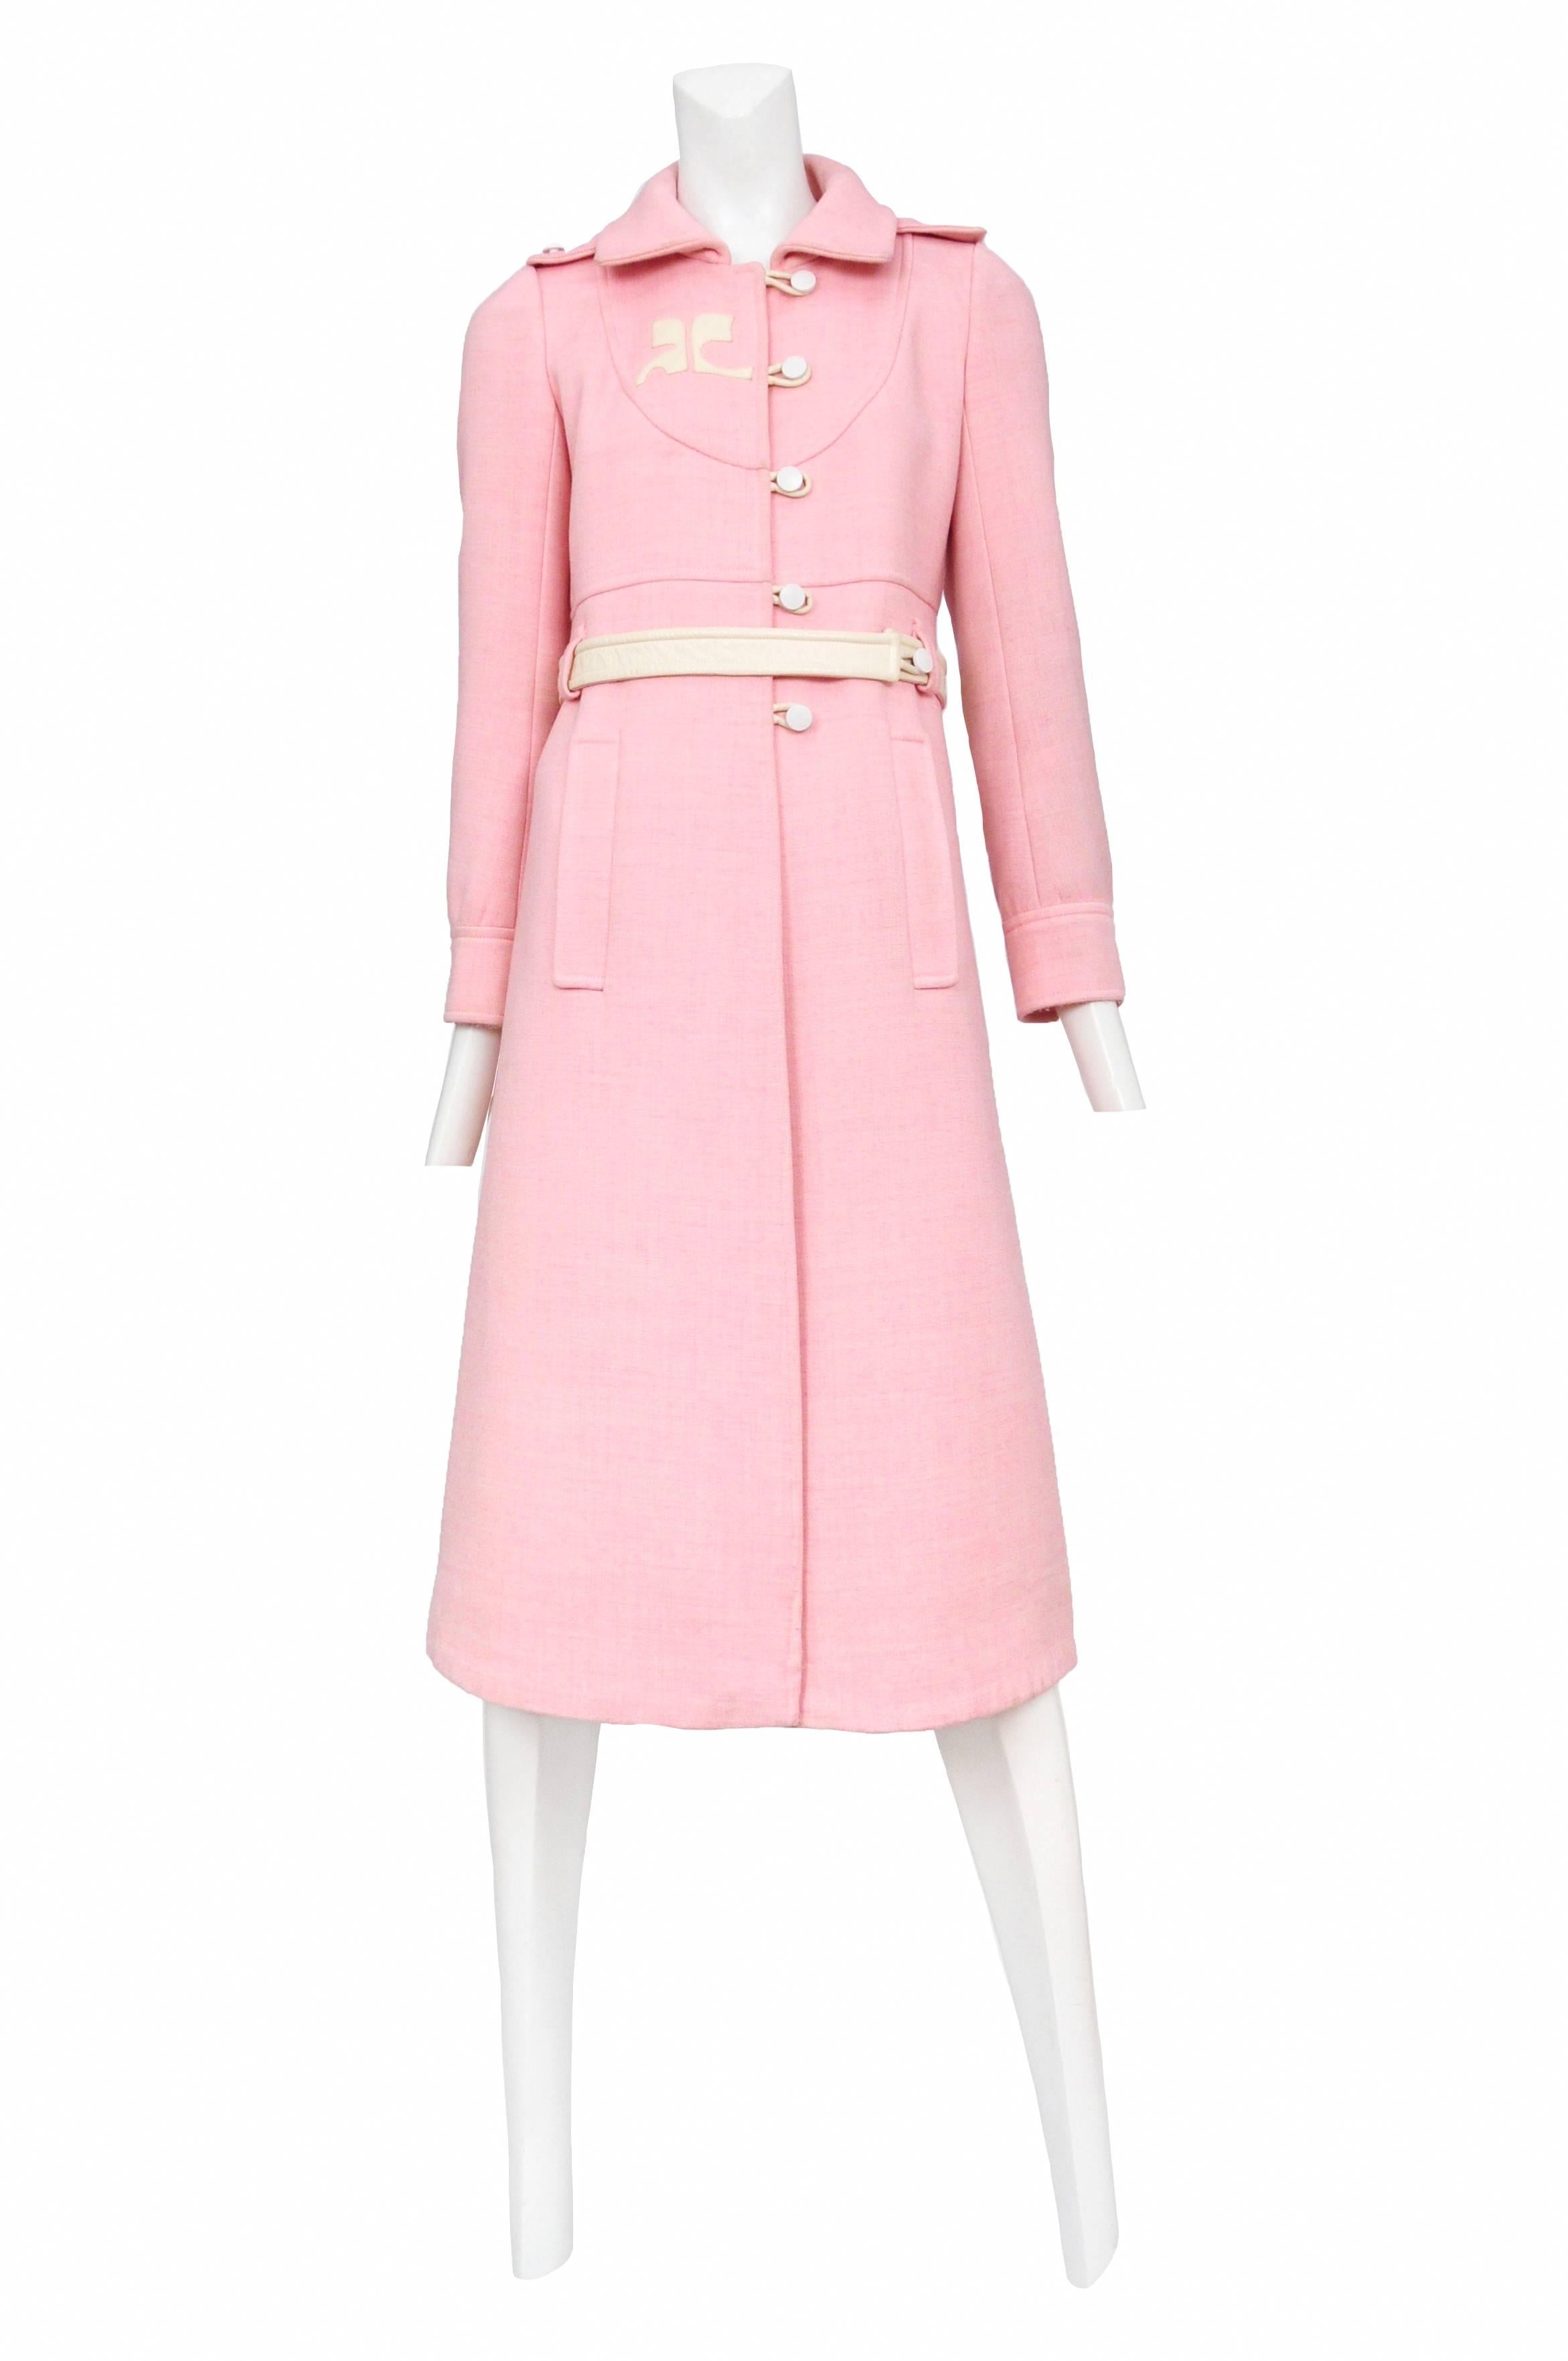 Soft pink wool coat with white vinyl buttons and belt with white vinyl Courreges logo at shoulder. Beautiful detailing throughout. Courreges size 0